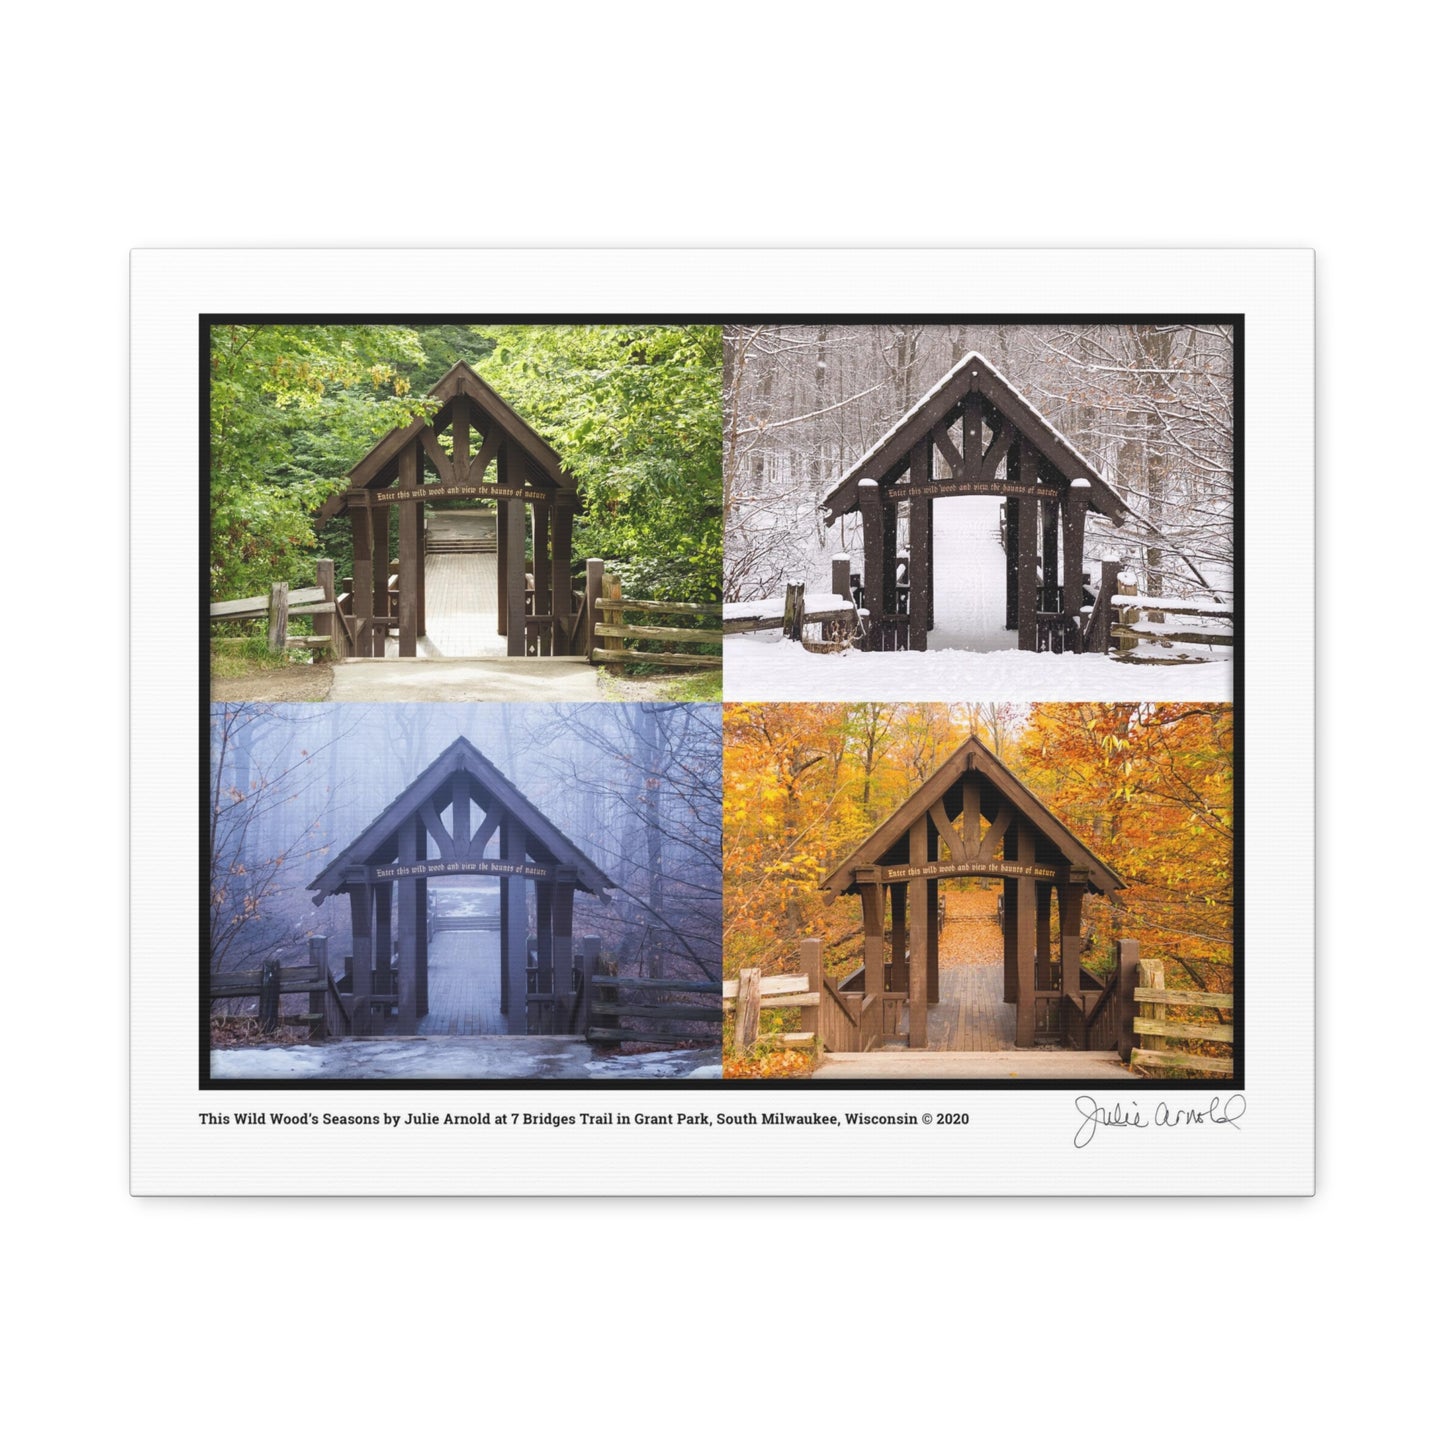 7 Bridges Trail’s Covered Bridge at Grant Park in South Milwaukee Wisconsin, All 4 Seasons Photo Collage, Canvas Wrap Wall Art